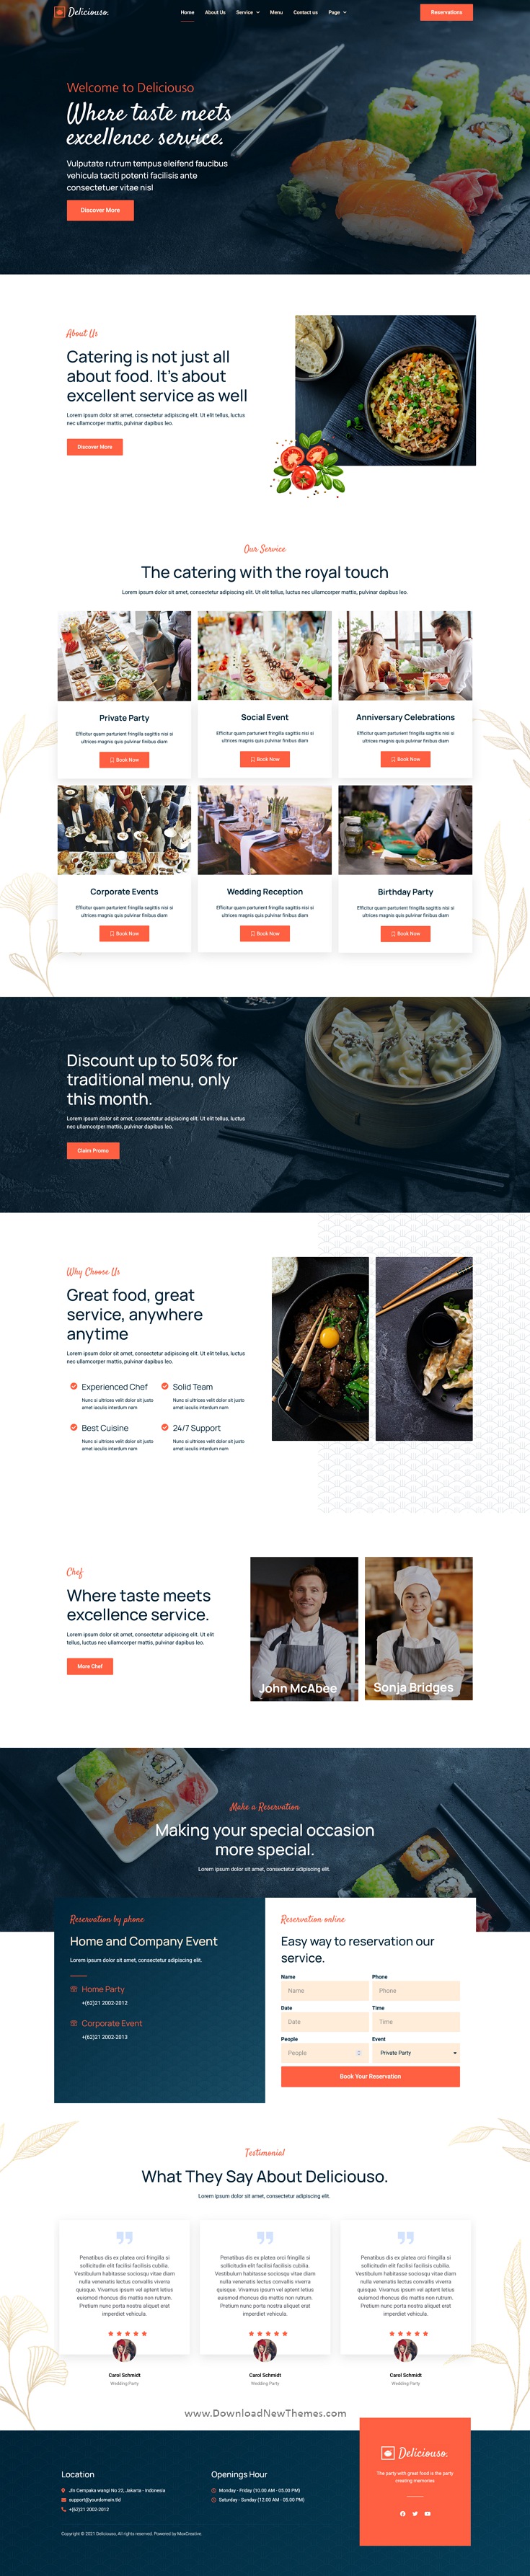 Deliciouso - Catering & Restaurant Elementor Template Kit Review